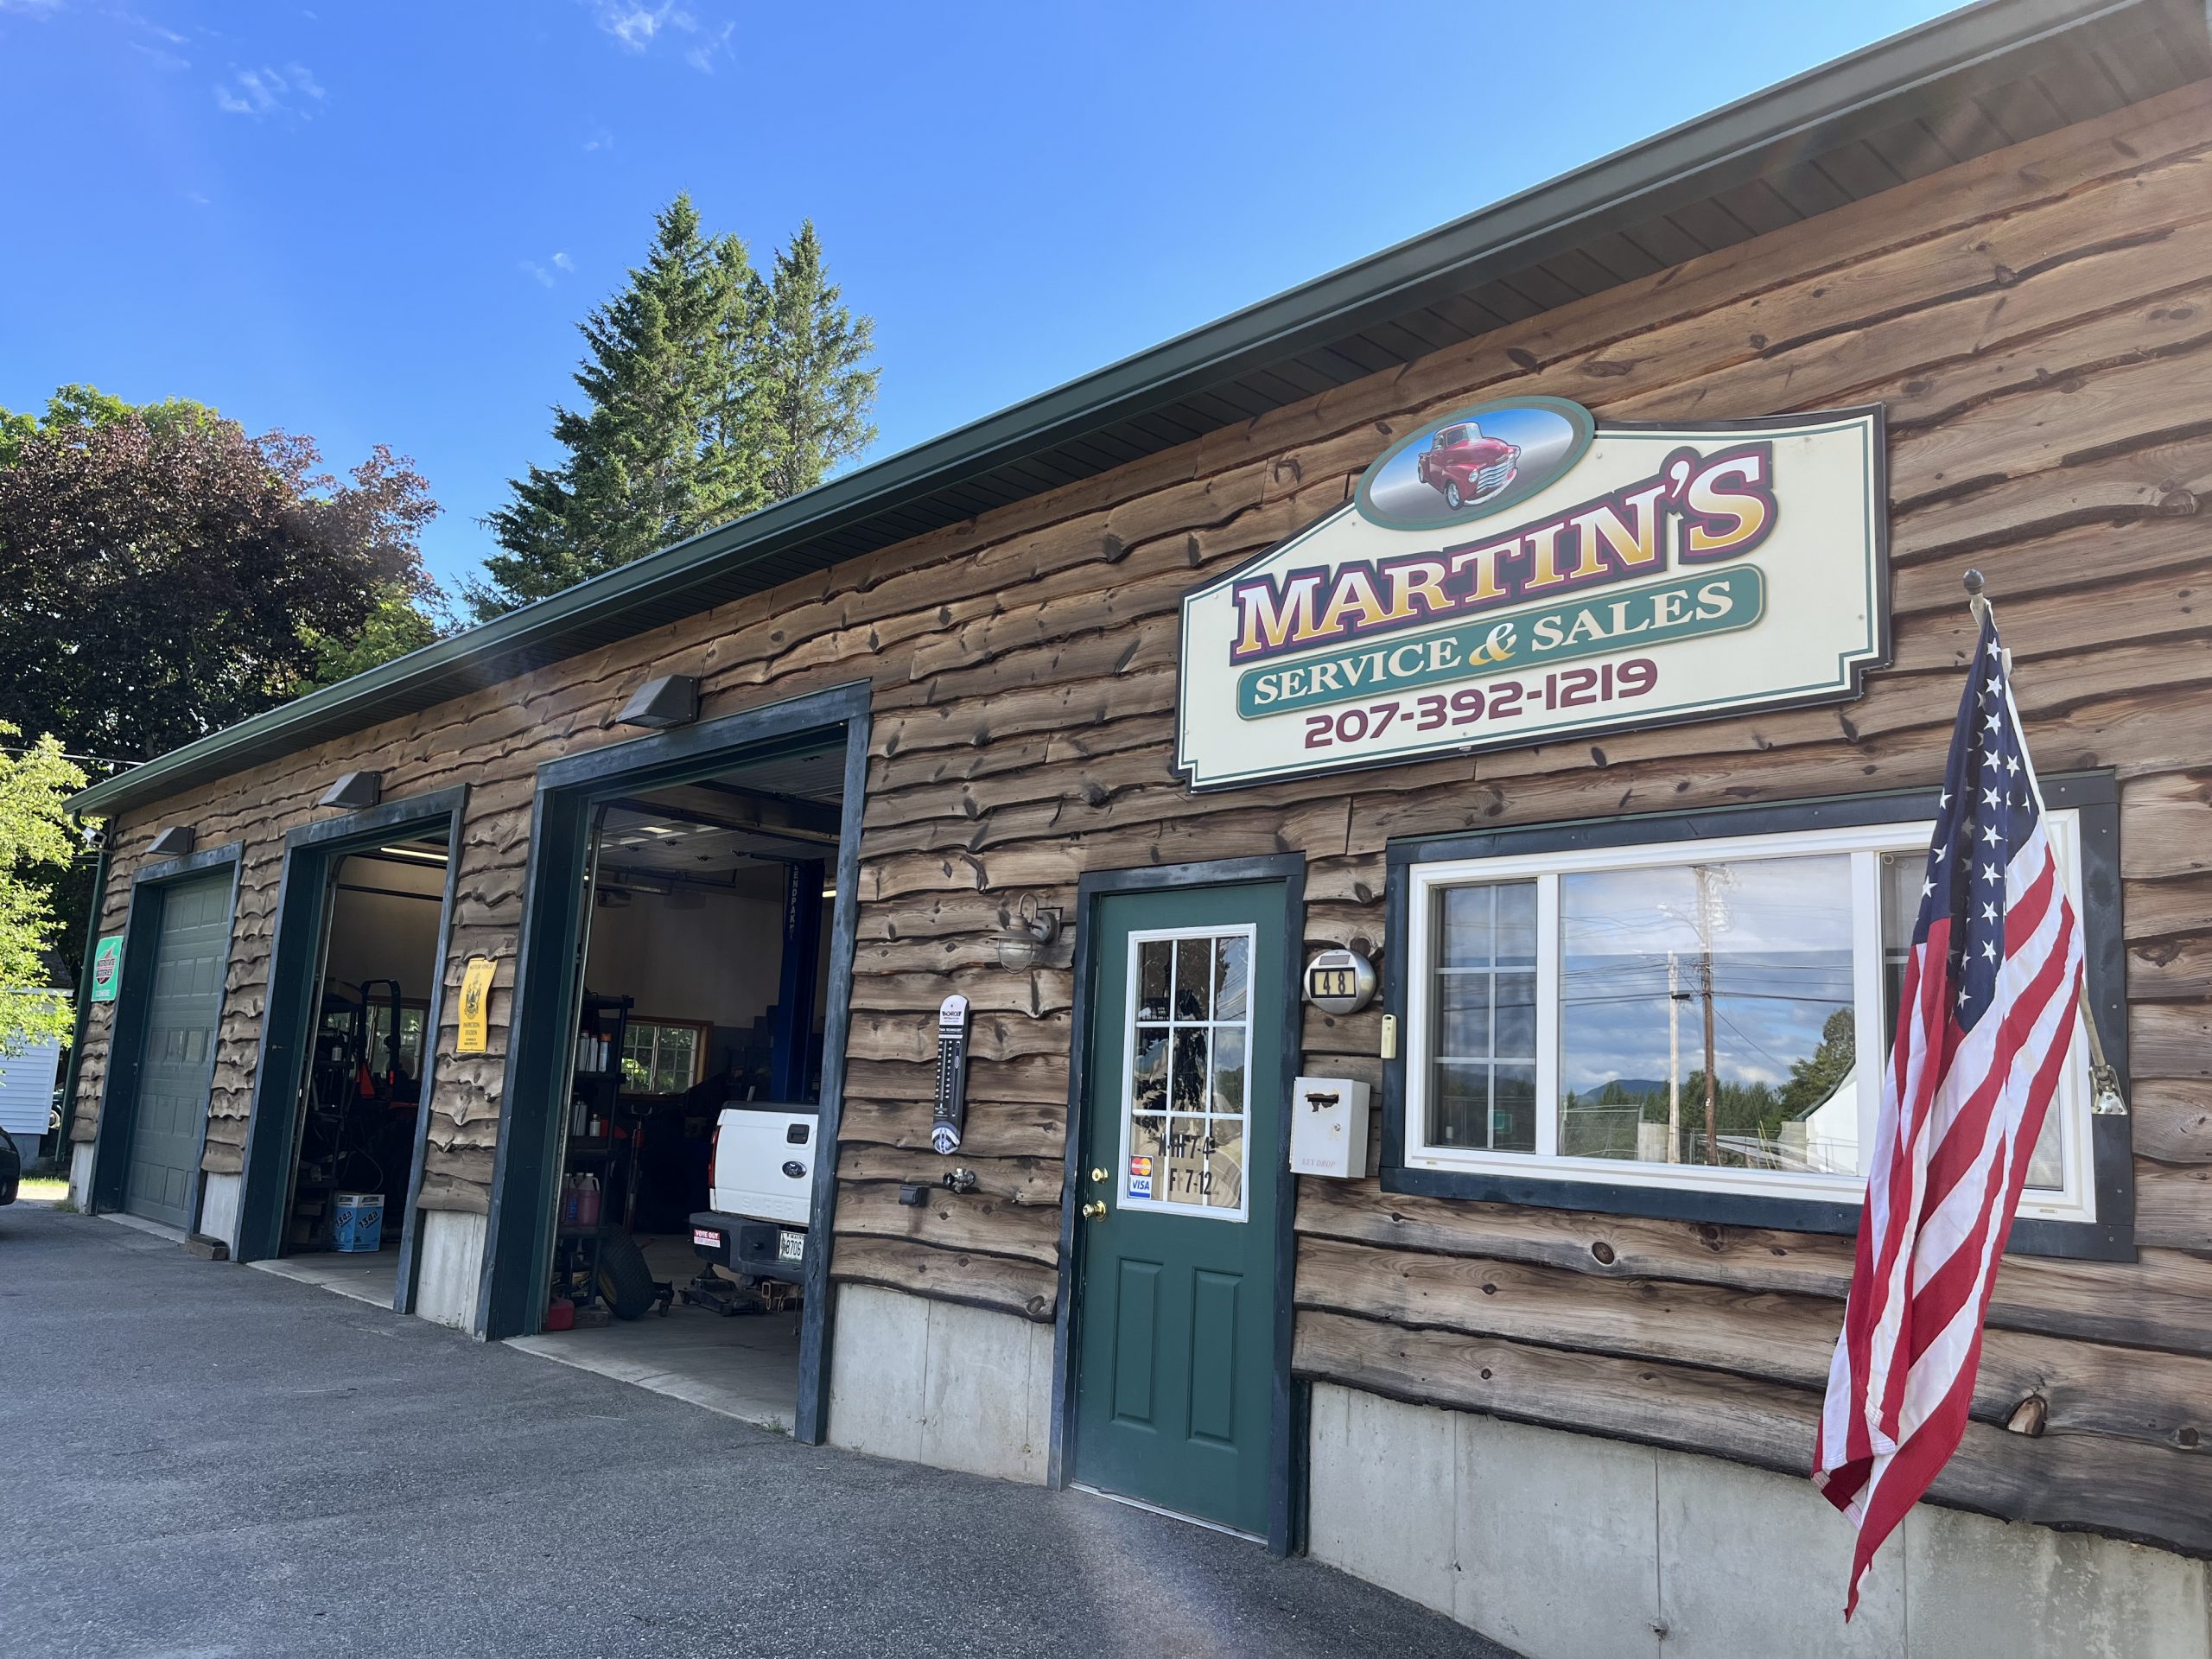 Store front - Martin's Service and Sales - Maine SBDC